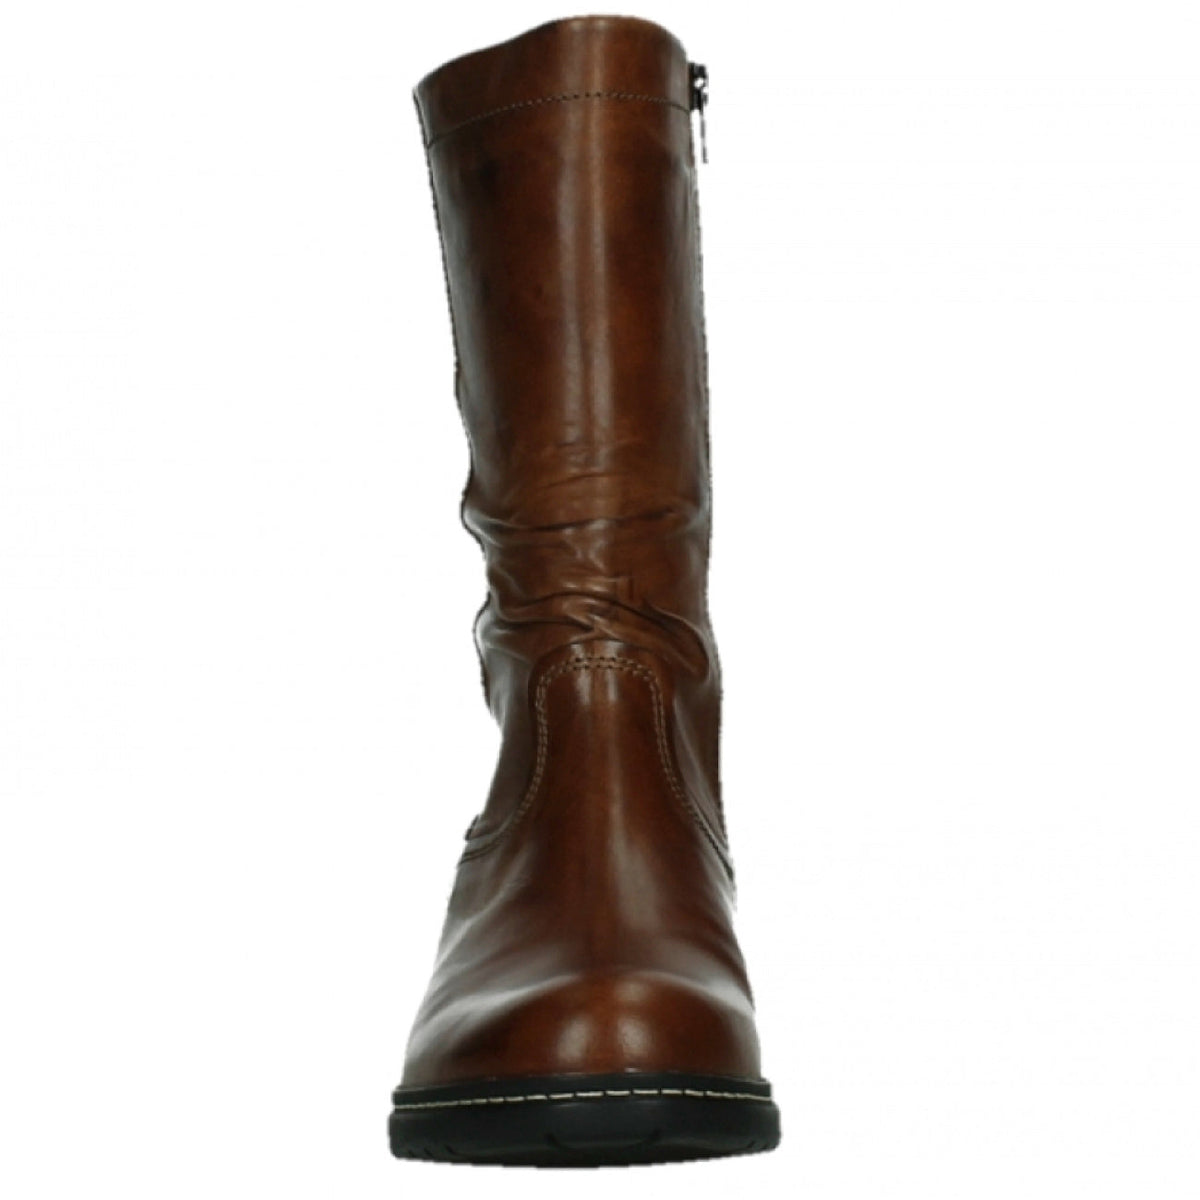 Wolky, Edmonton, Boots, Soft Wax Leather, Cognac Boots Wolky 